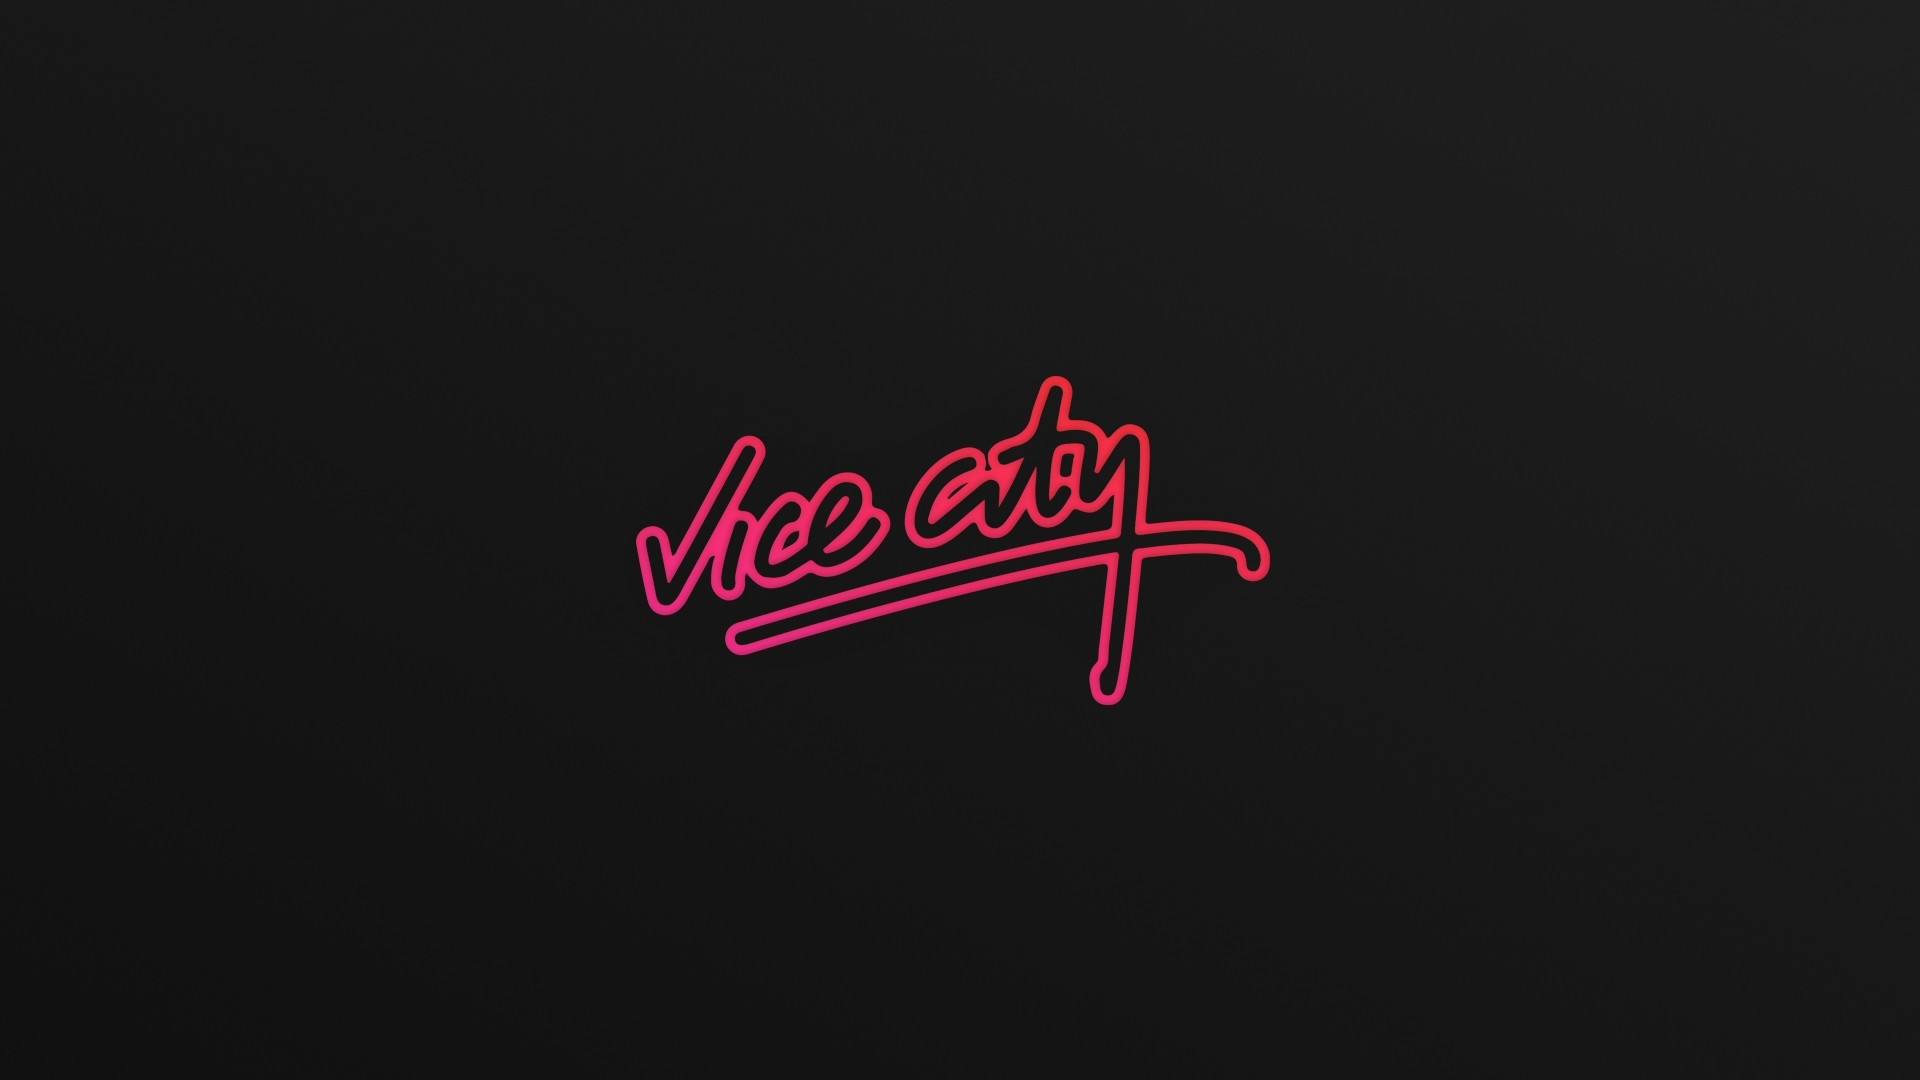 GTA Vice City Wallpaper (best GTA Vice City Wallpaper and image) on WallpaperChat